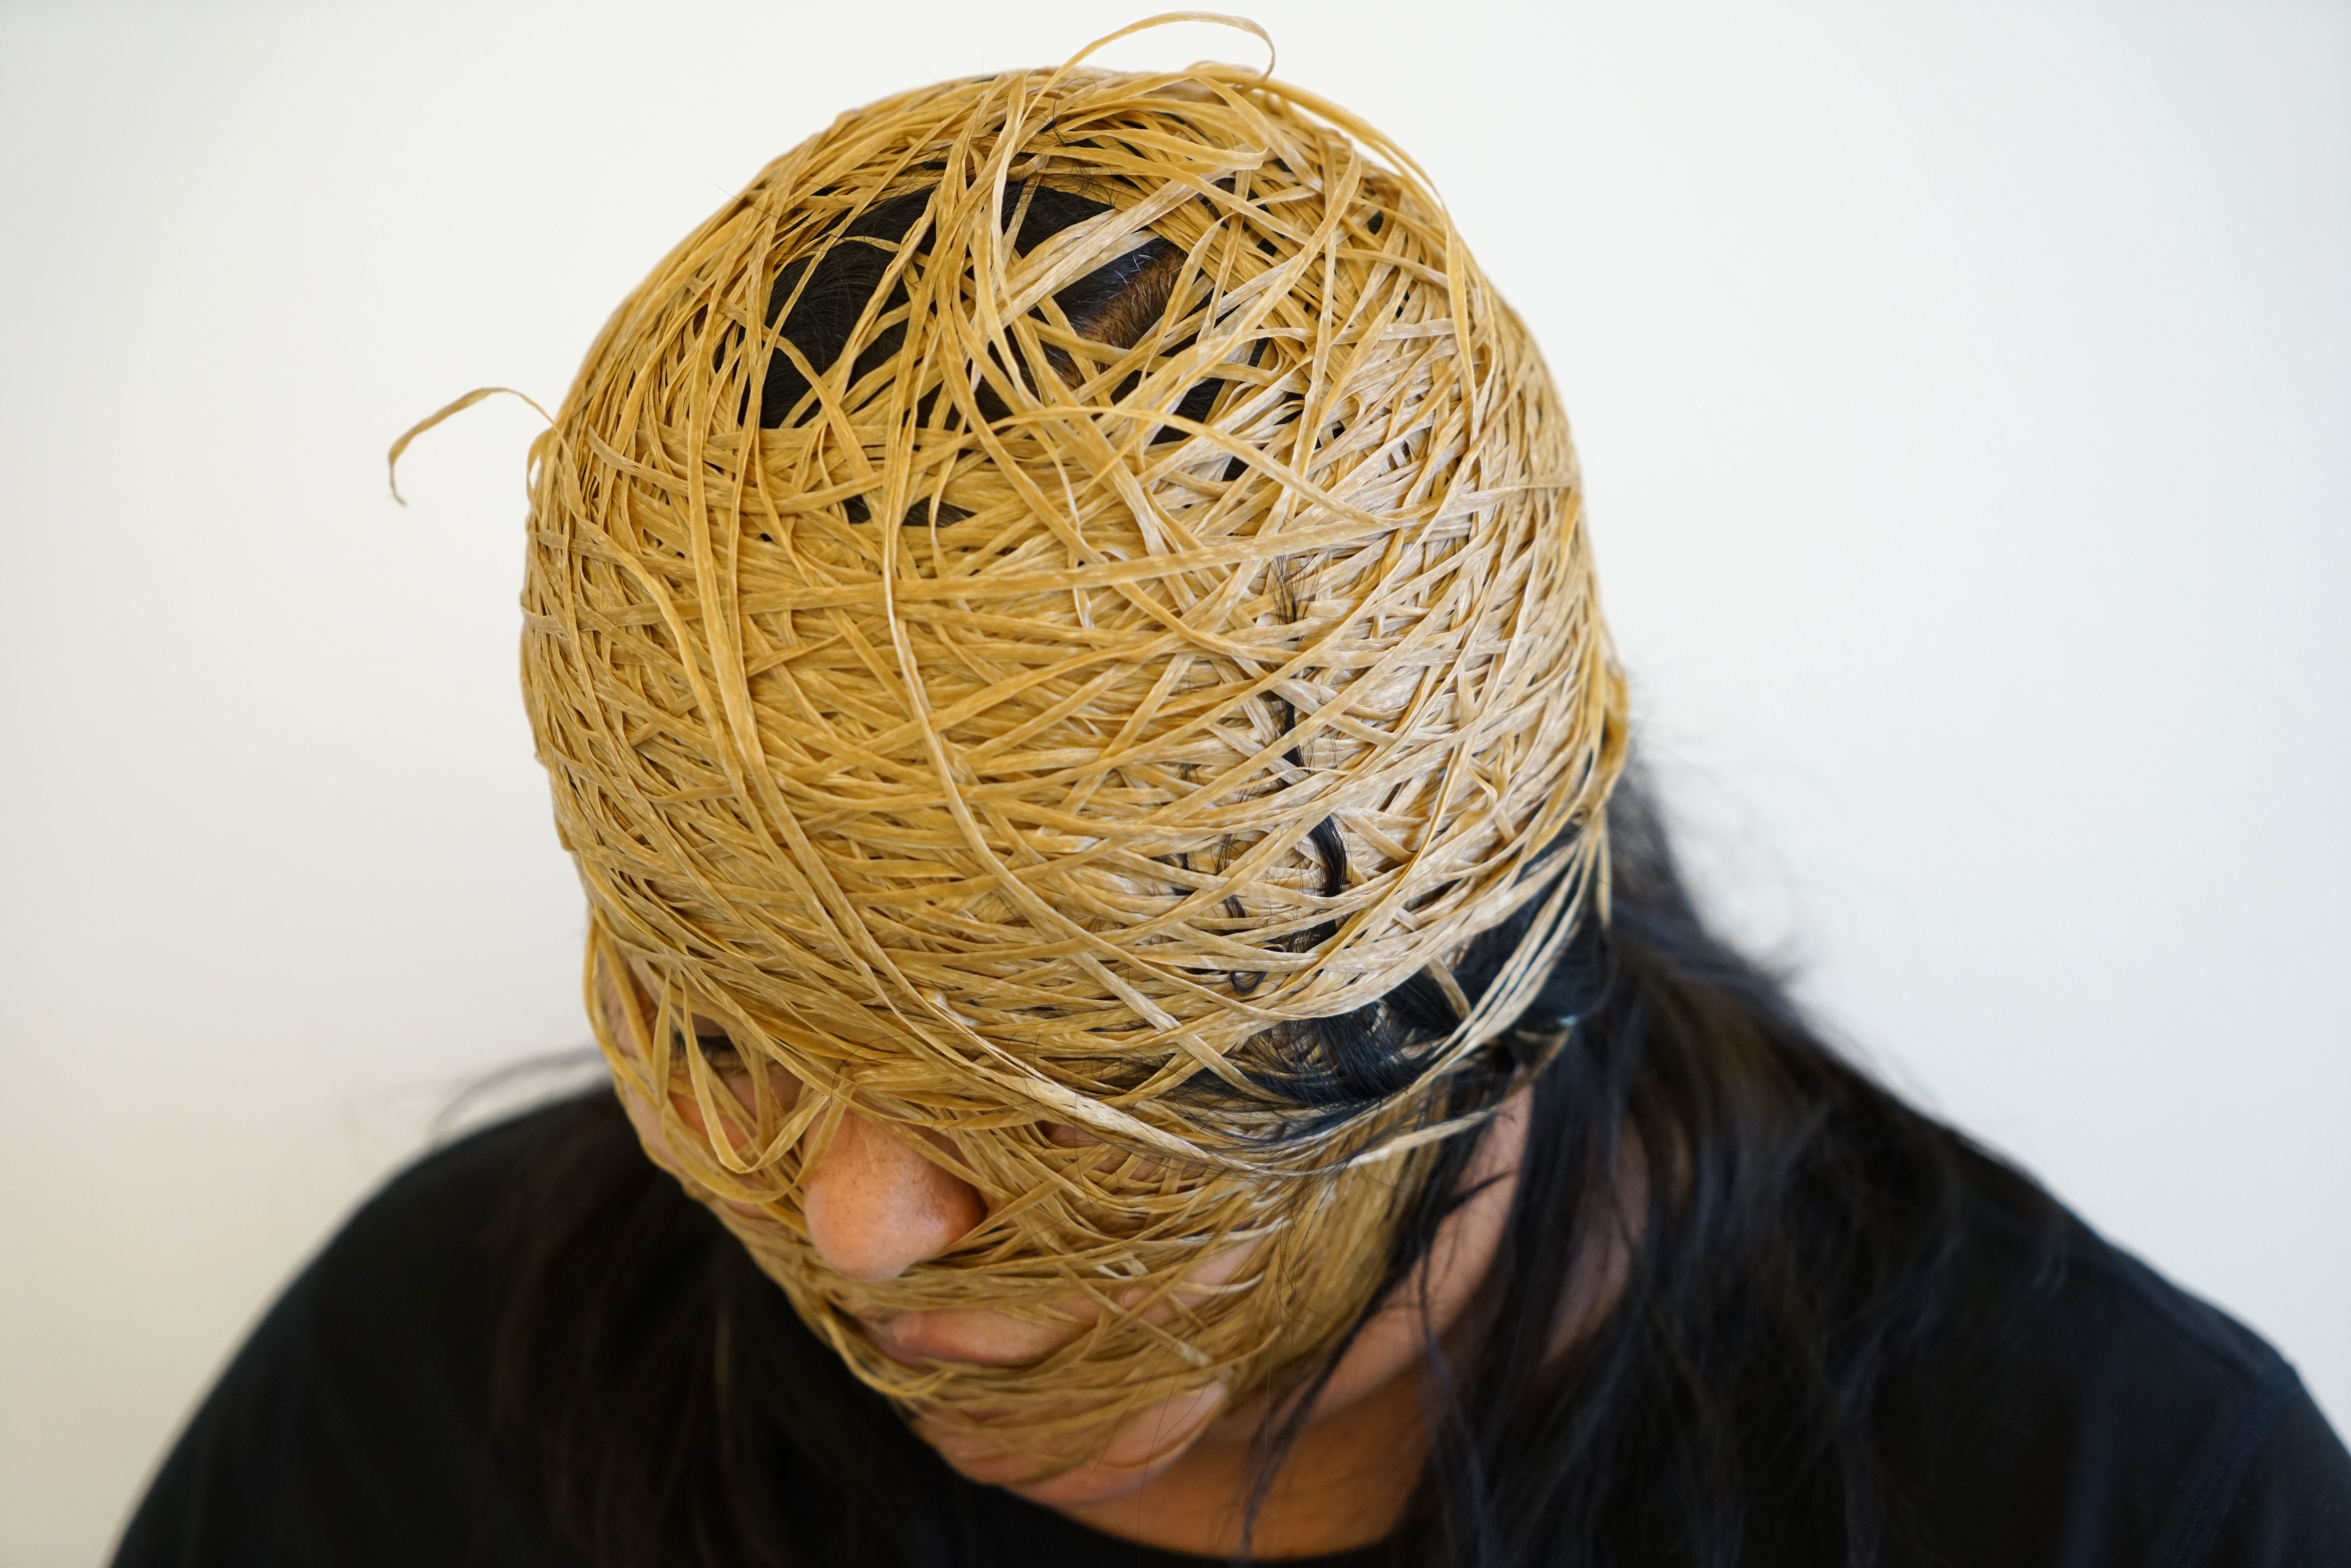 Anna Tsouhlarakis wrapped in twine in black t-shirt